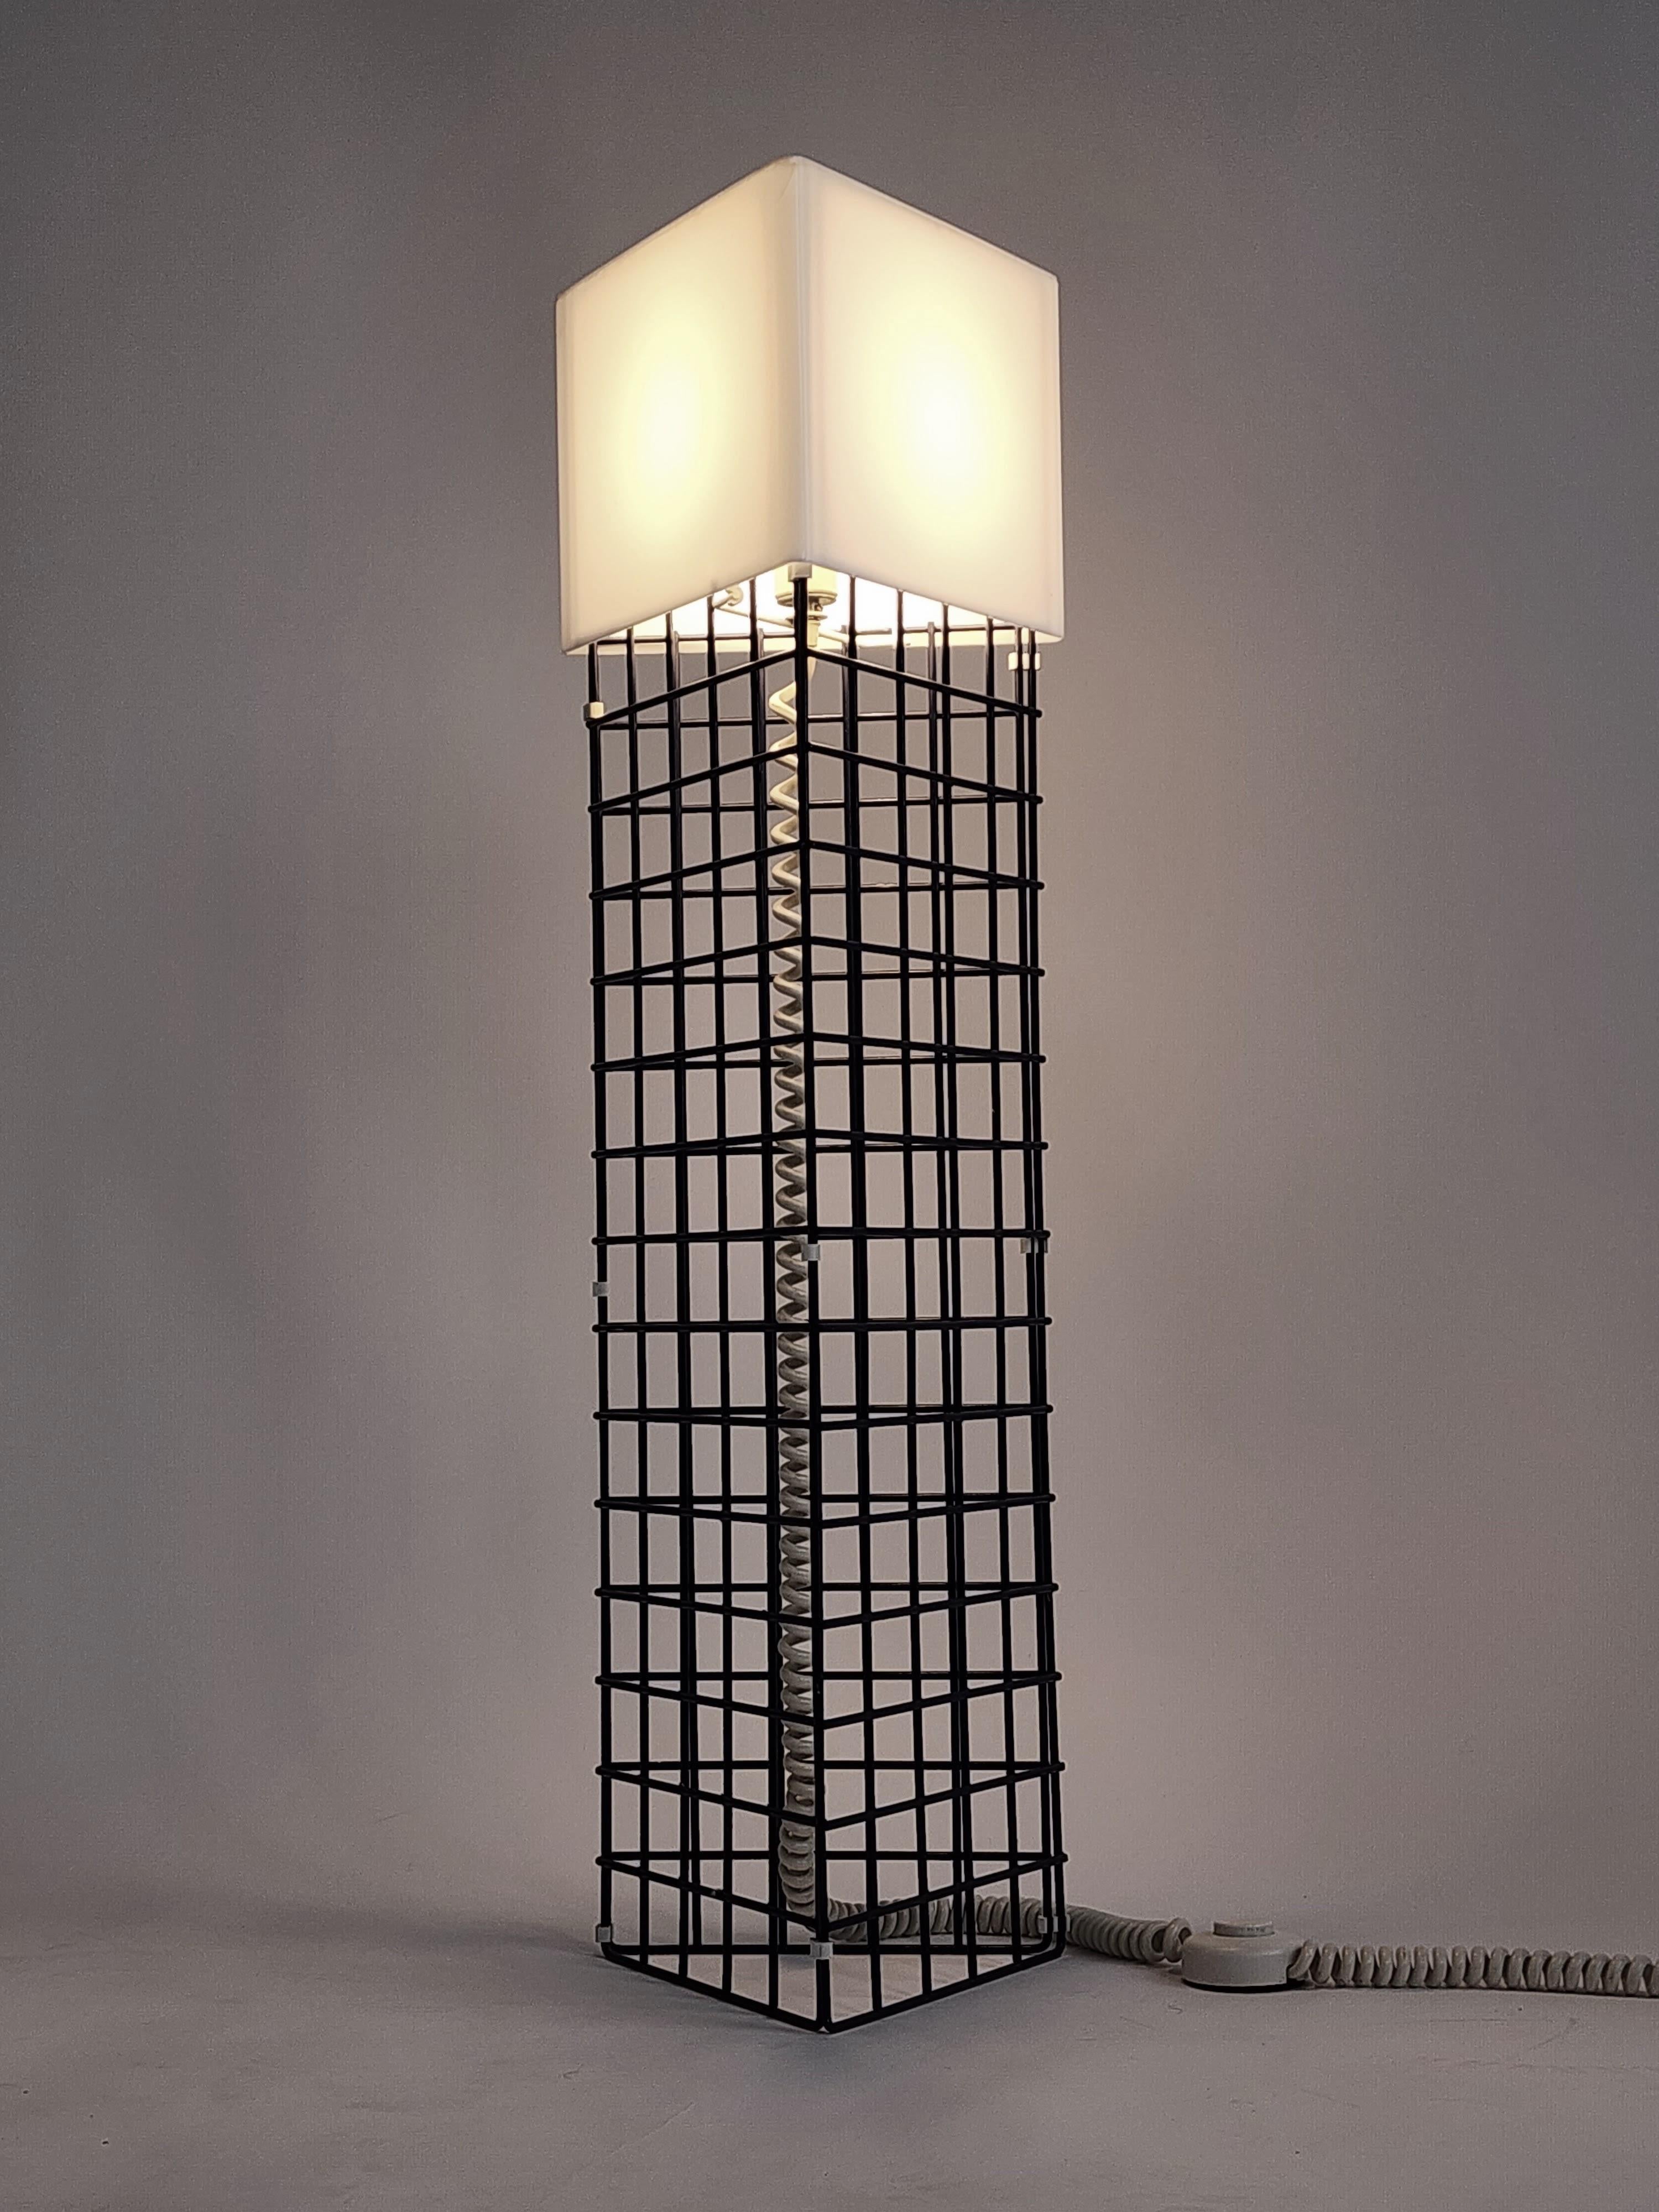 Opale acrylic shade sitting on a architectural grid floor lamp, powder coated in a dark blue tone. 

One E26 ceramic socket rated at 60 watt. 

Foot switch on cord.